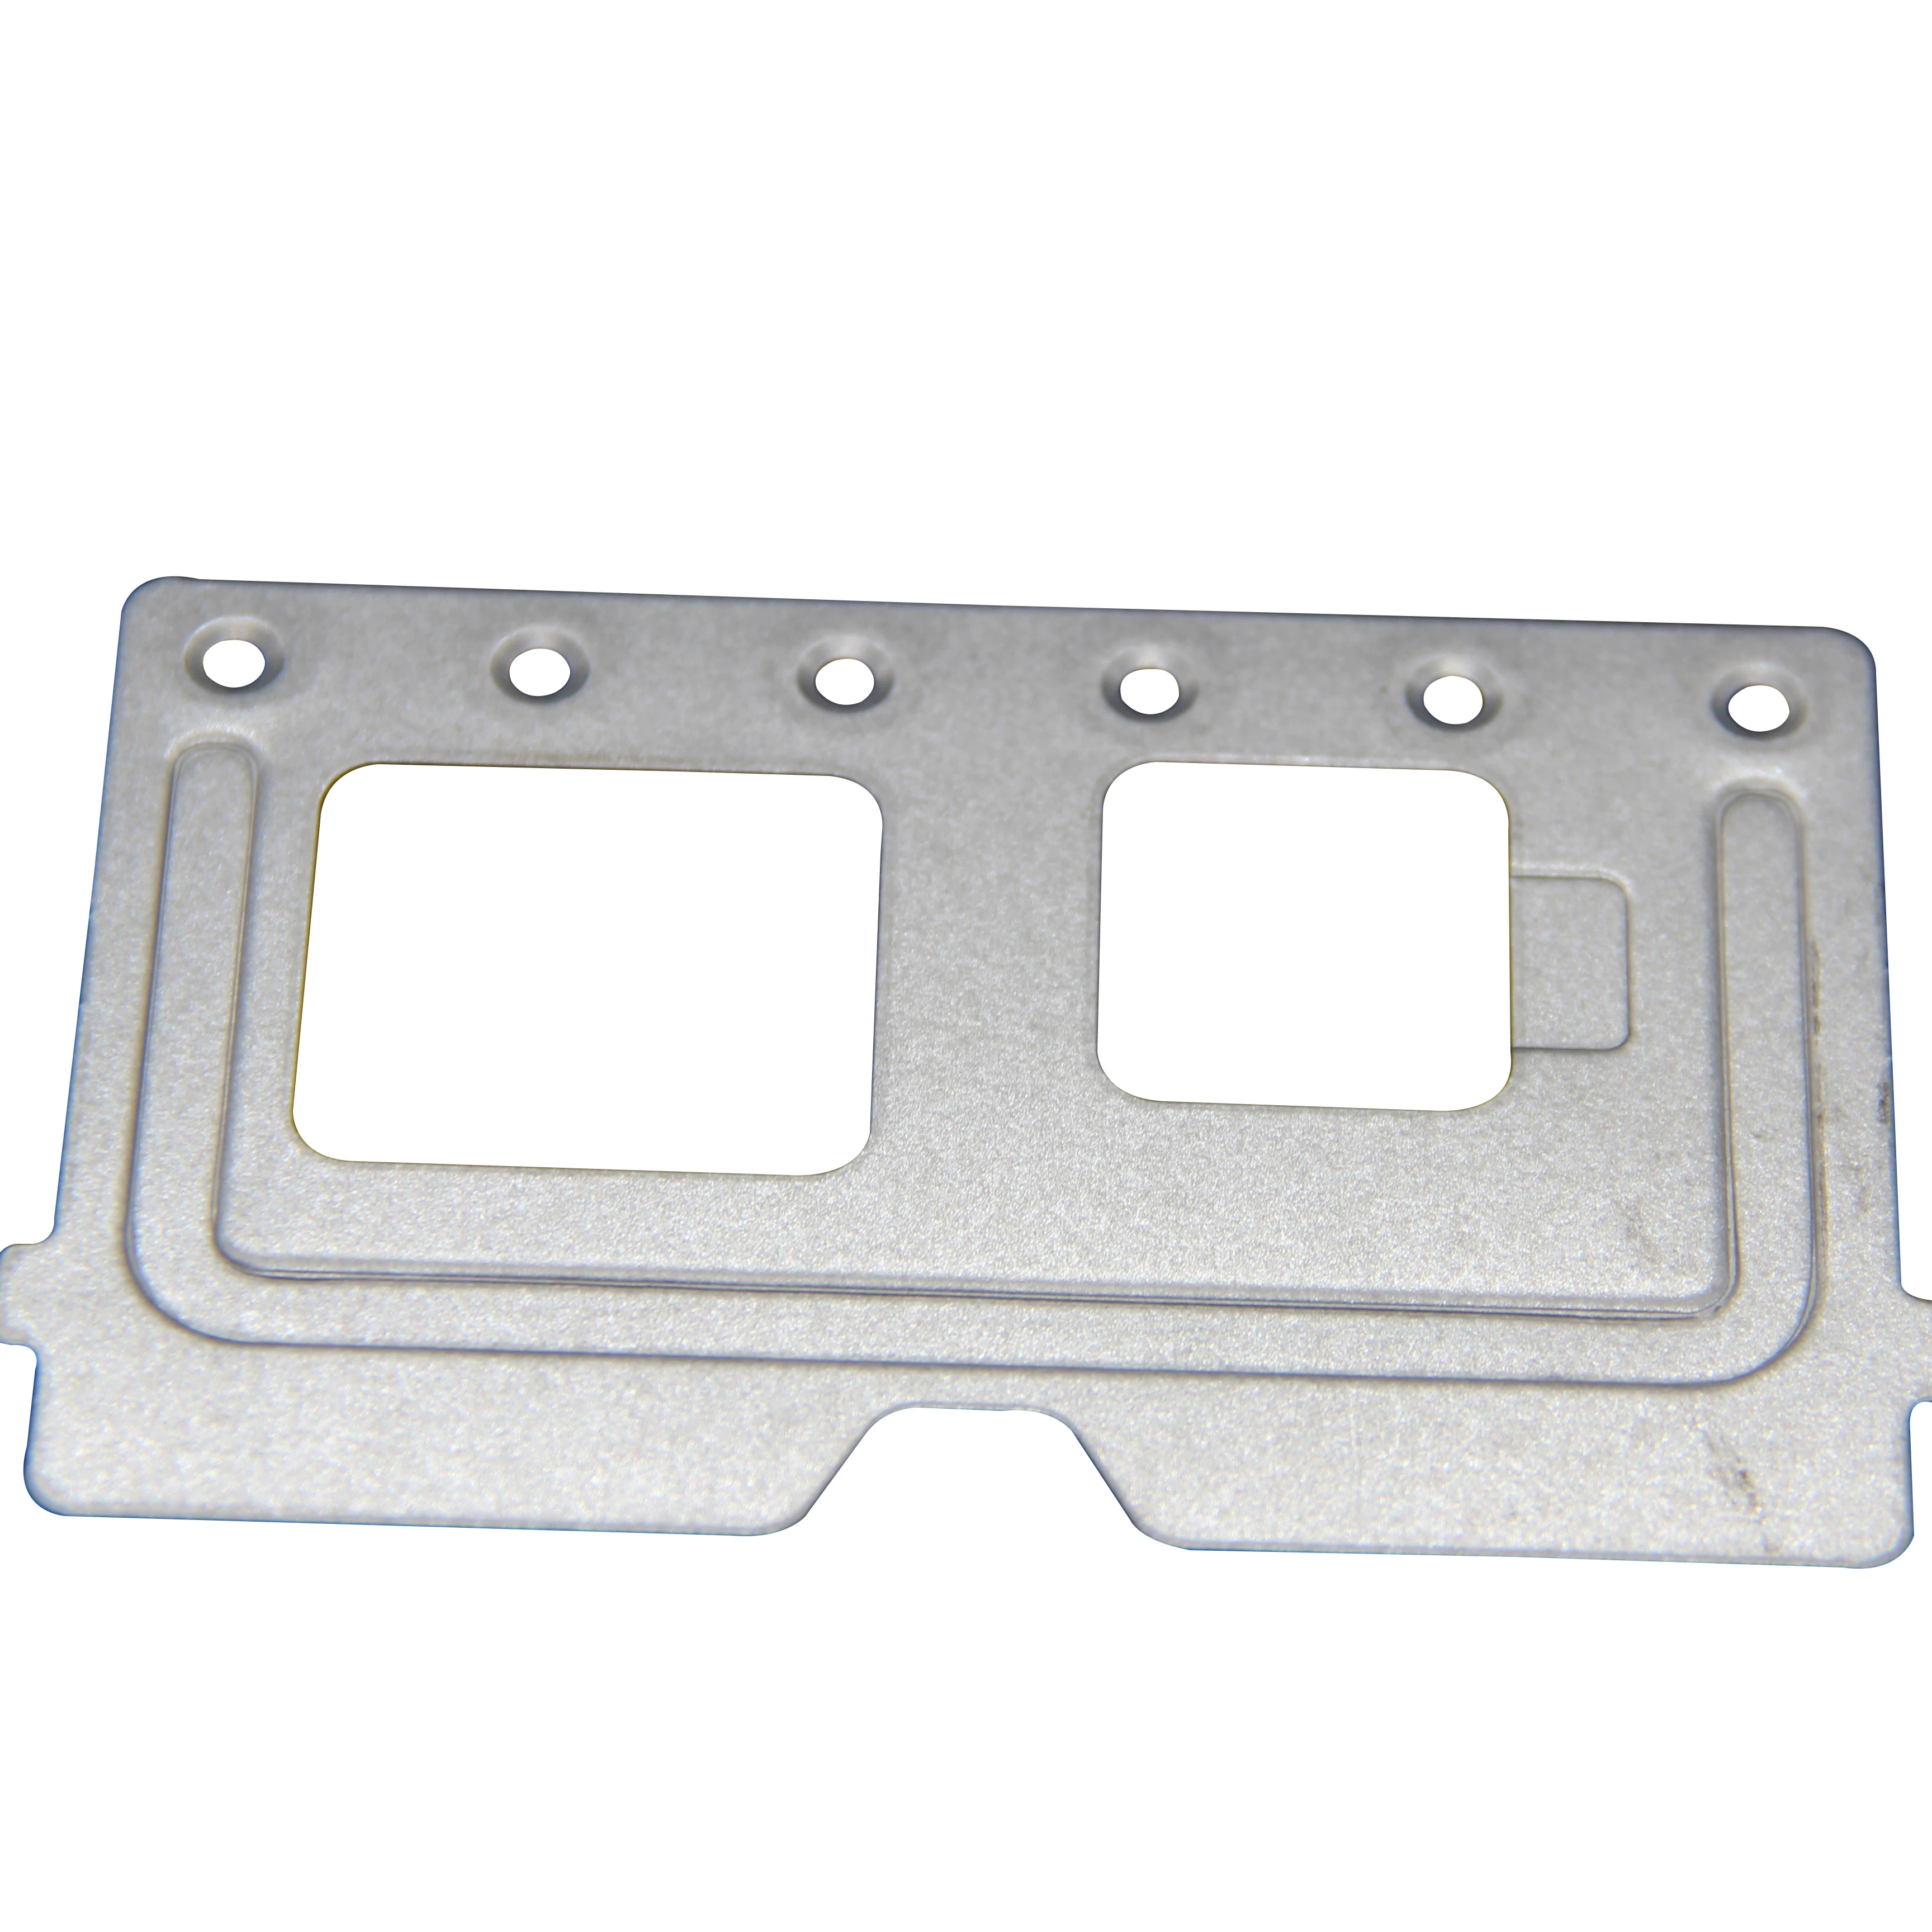 Custom fabrication services aluminum stainless steel sheetmetal precision stamping product service metal stamping parts